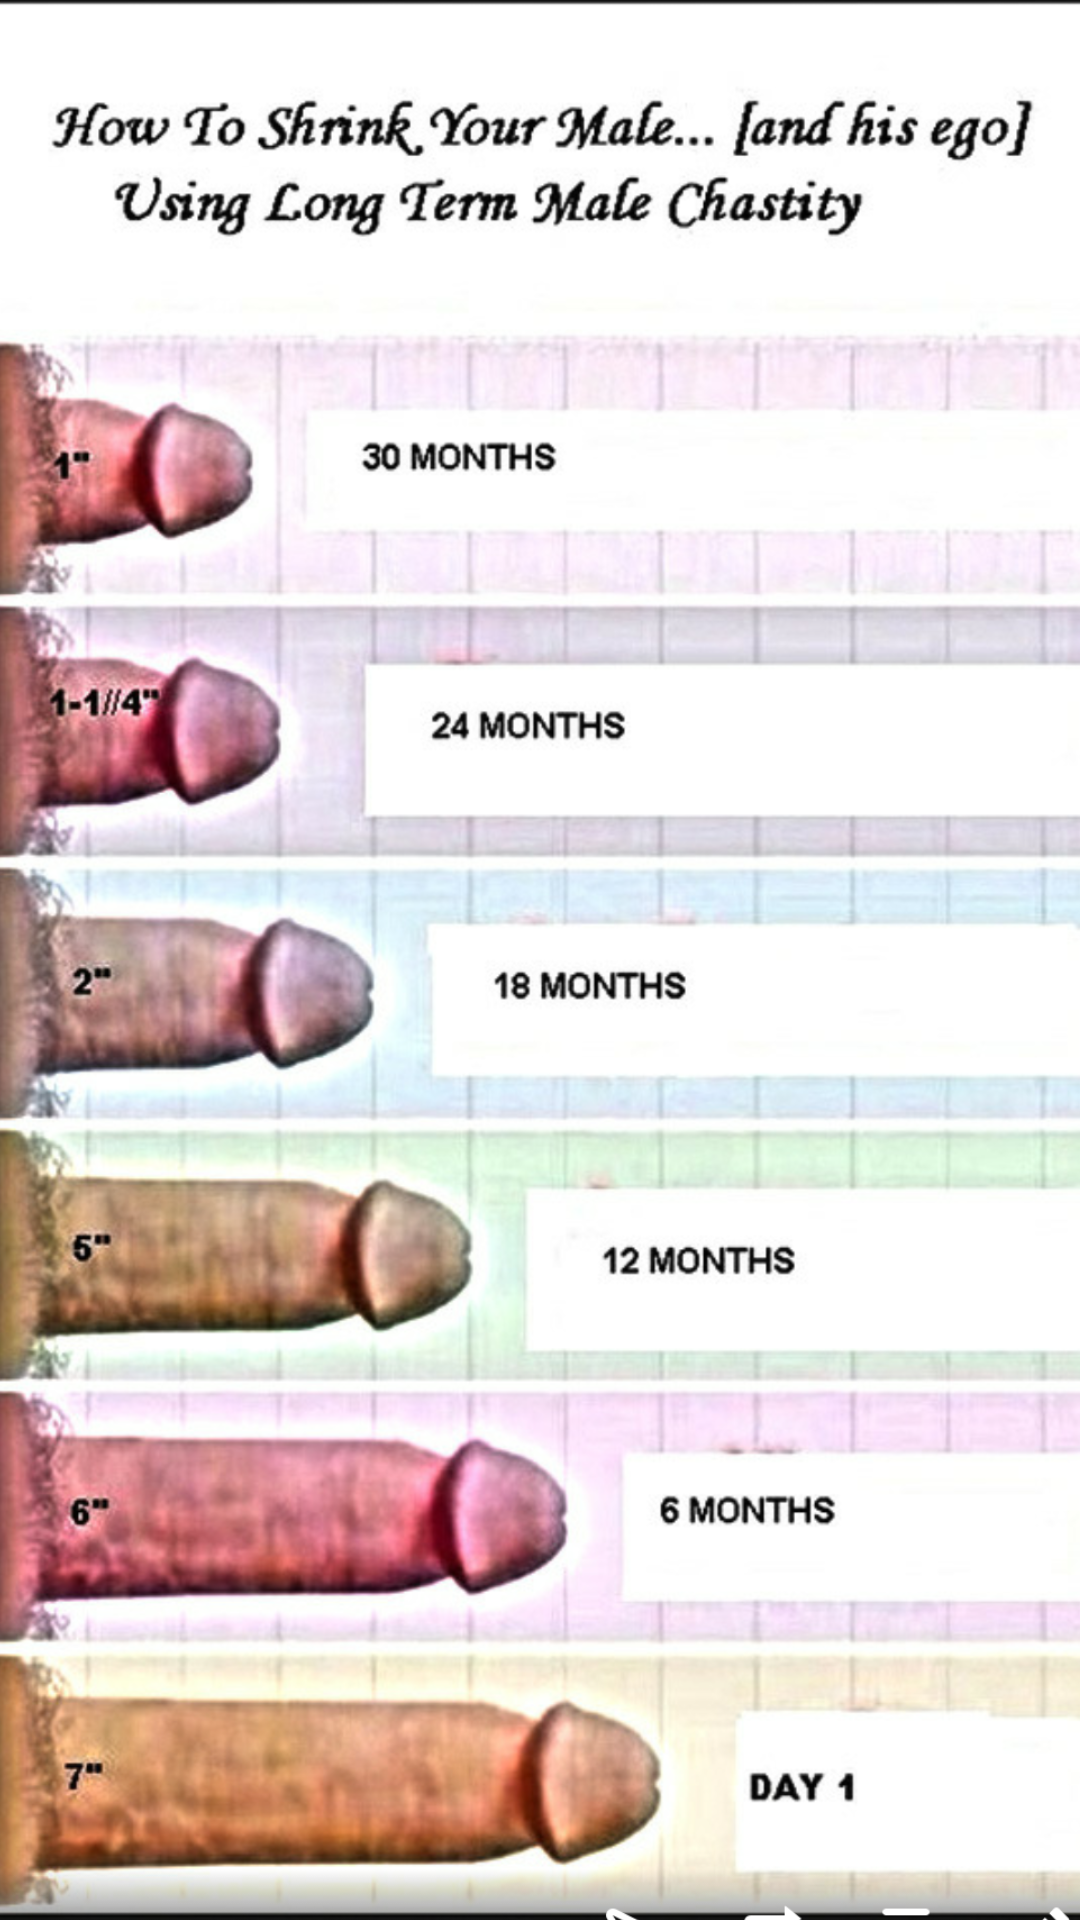 This chart shows the effects that chastity has on the male member I’m at 18...